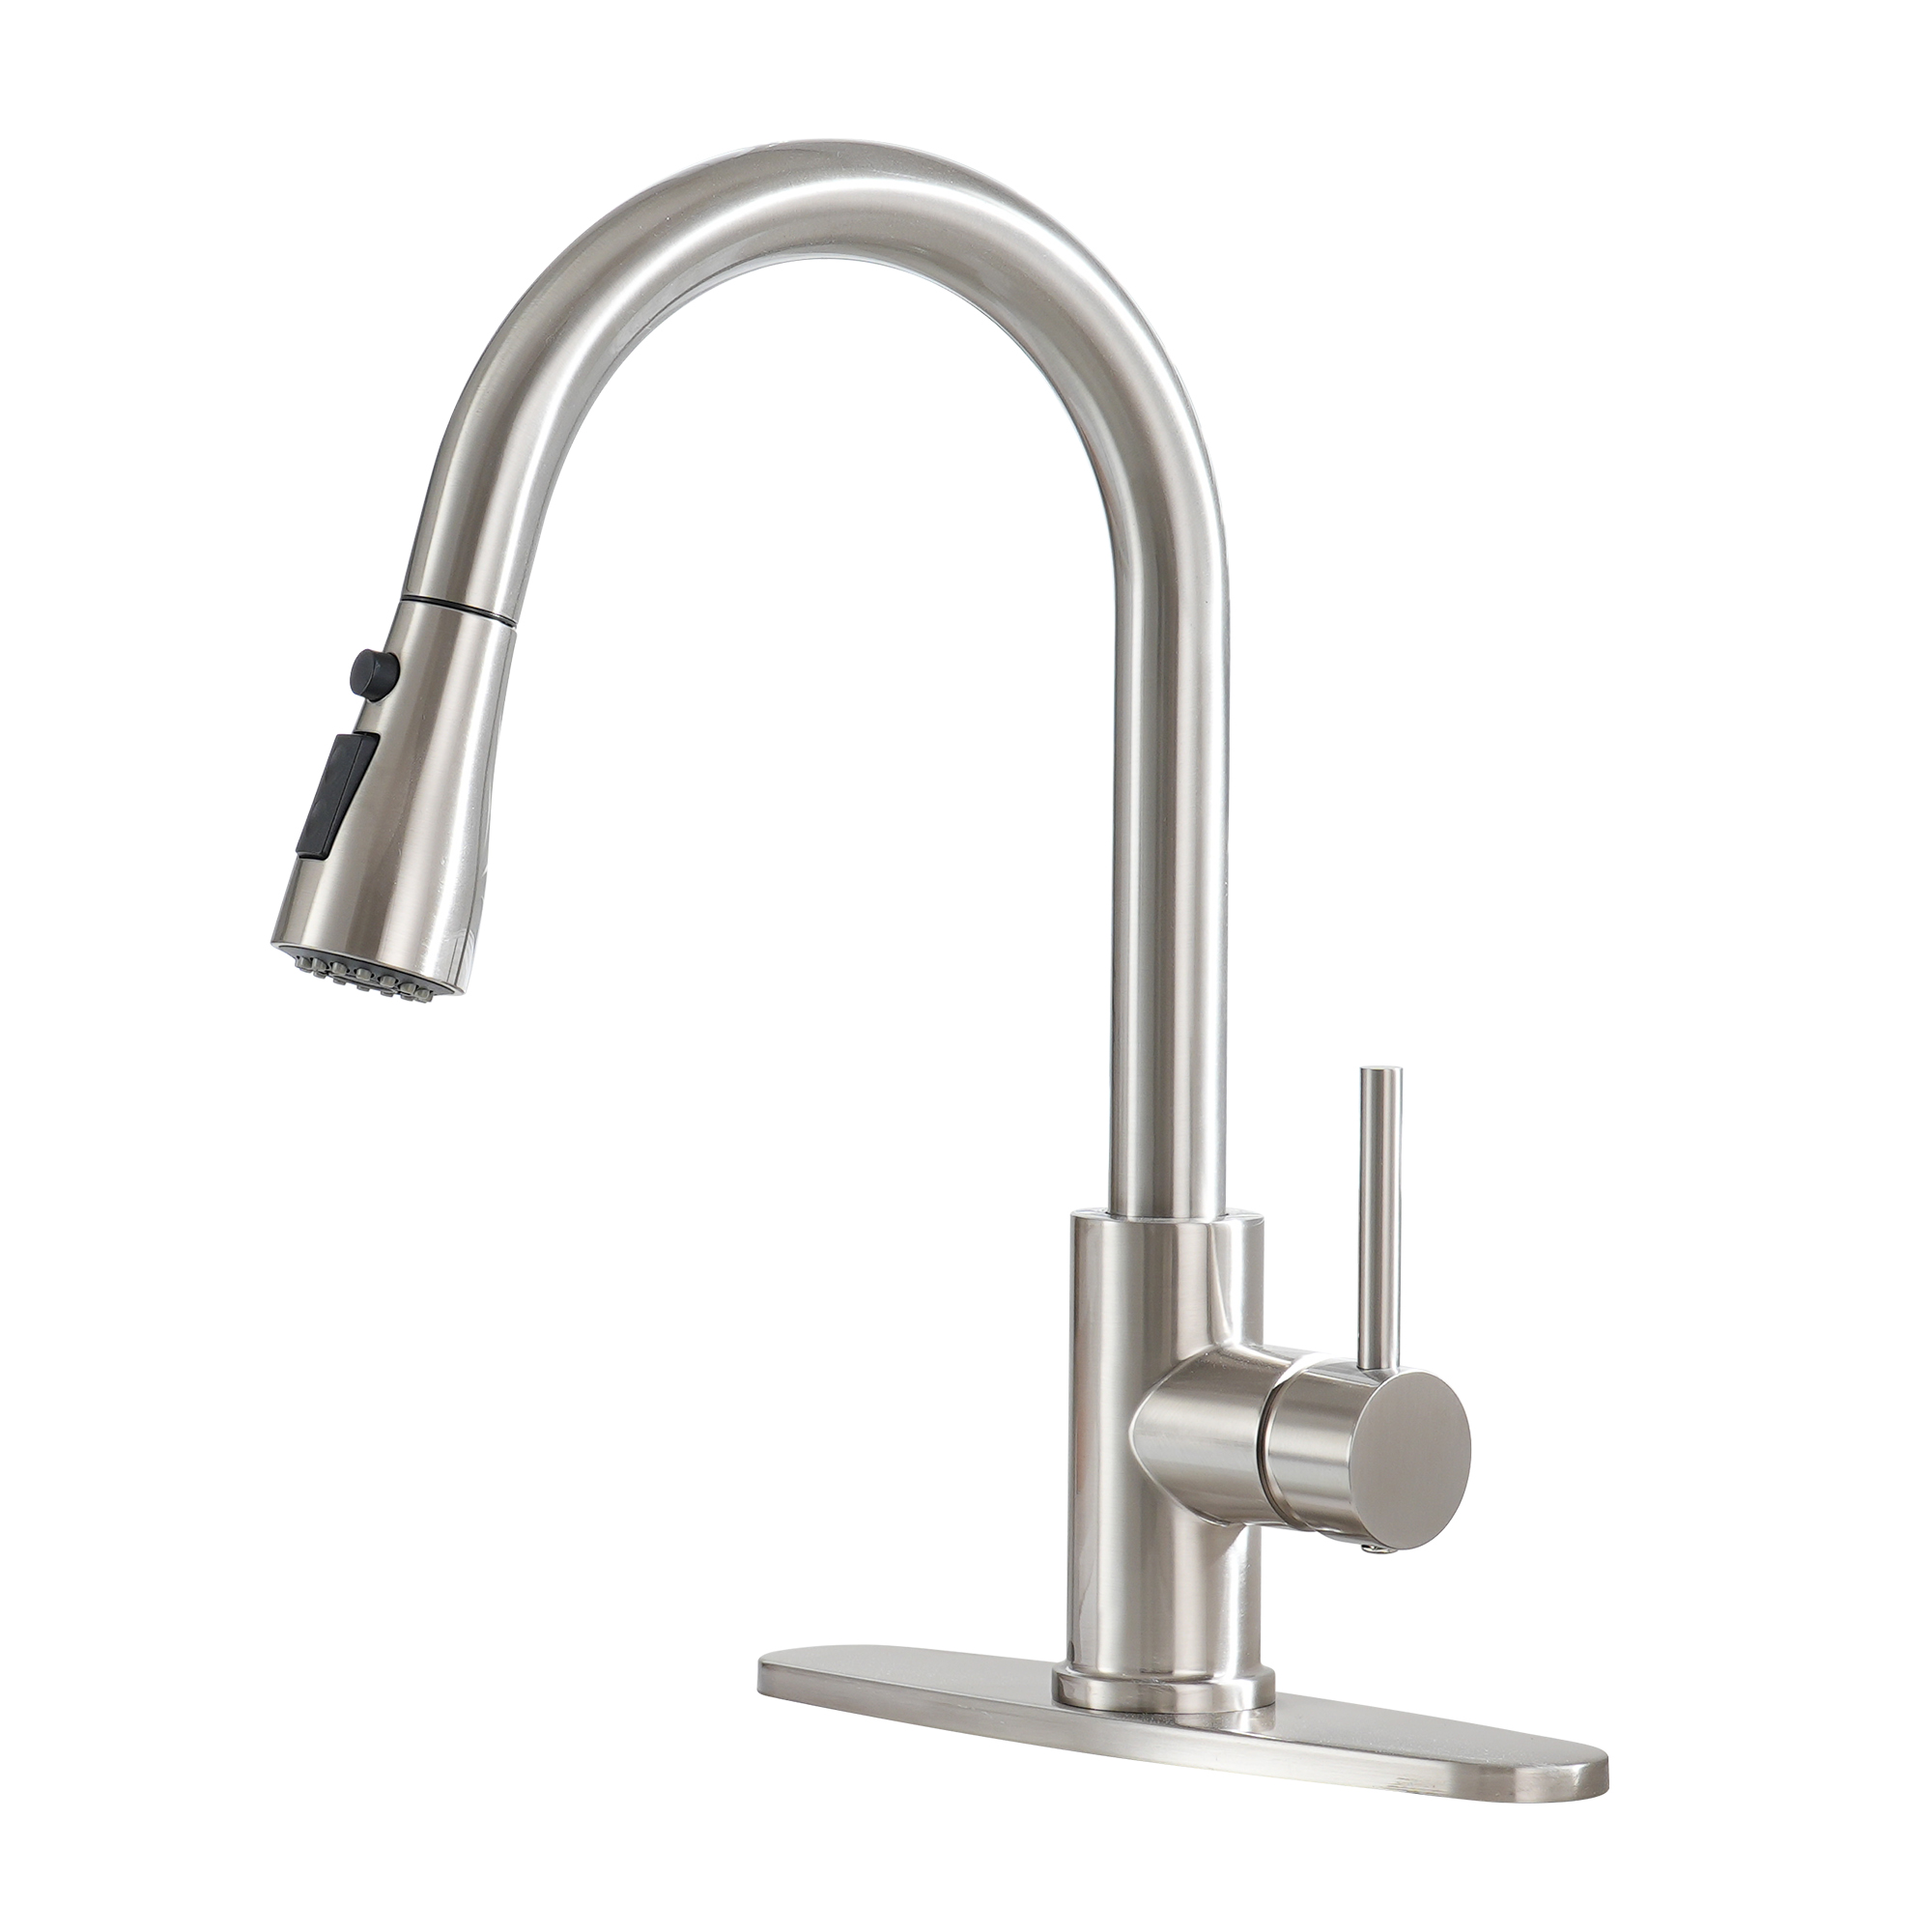 Mondawe Single Handle High Arc Pull Out Kitchen Faucet Single Level Stainless Steel Kitchen Sink Faucets with Pull Down Sprayer